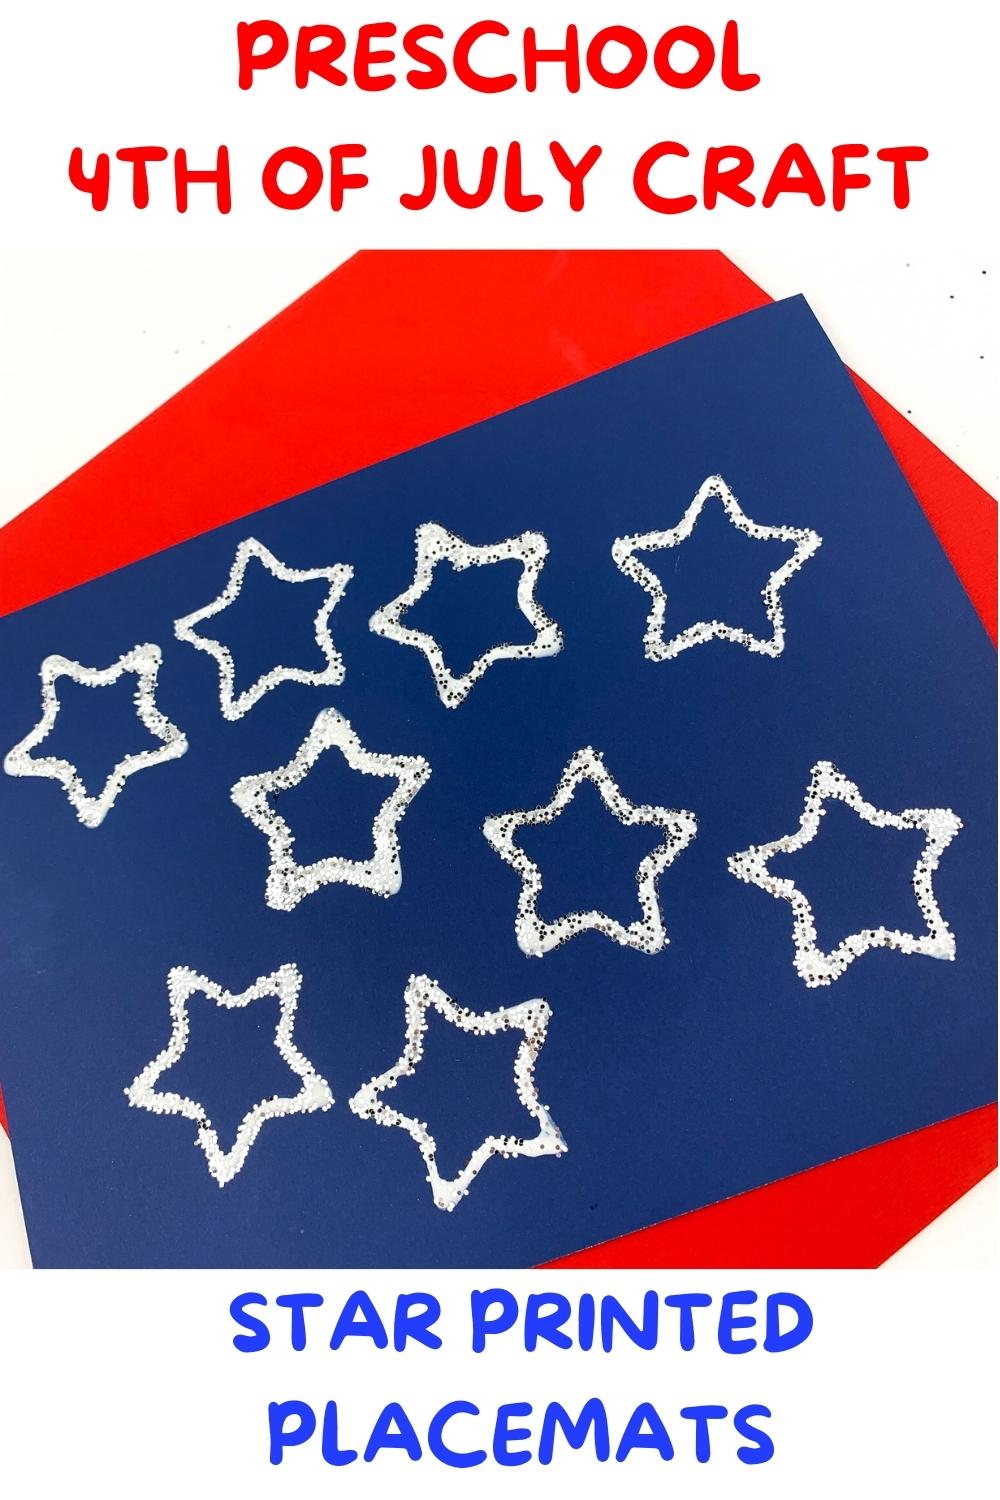 Preschool craft for Independence day to make a simple placemat with cookie cutter stars